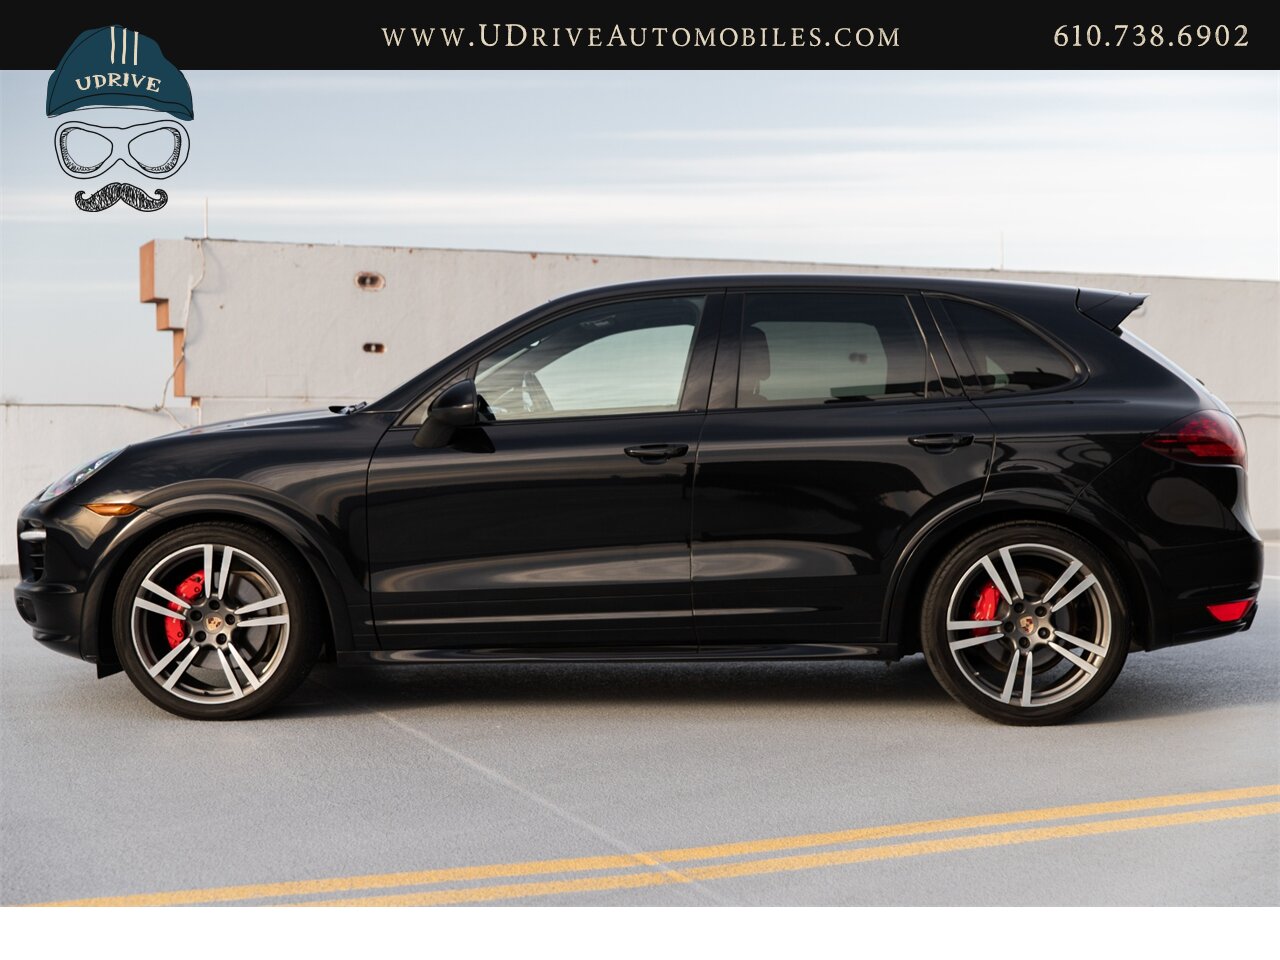 2013 Porsche Cayenne GTS Service History 1 Owner 21in Wheels  Espresso / Cognac Two Tone Leather - Photo 9 - West Chester, PA 19382